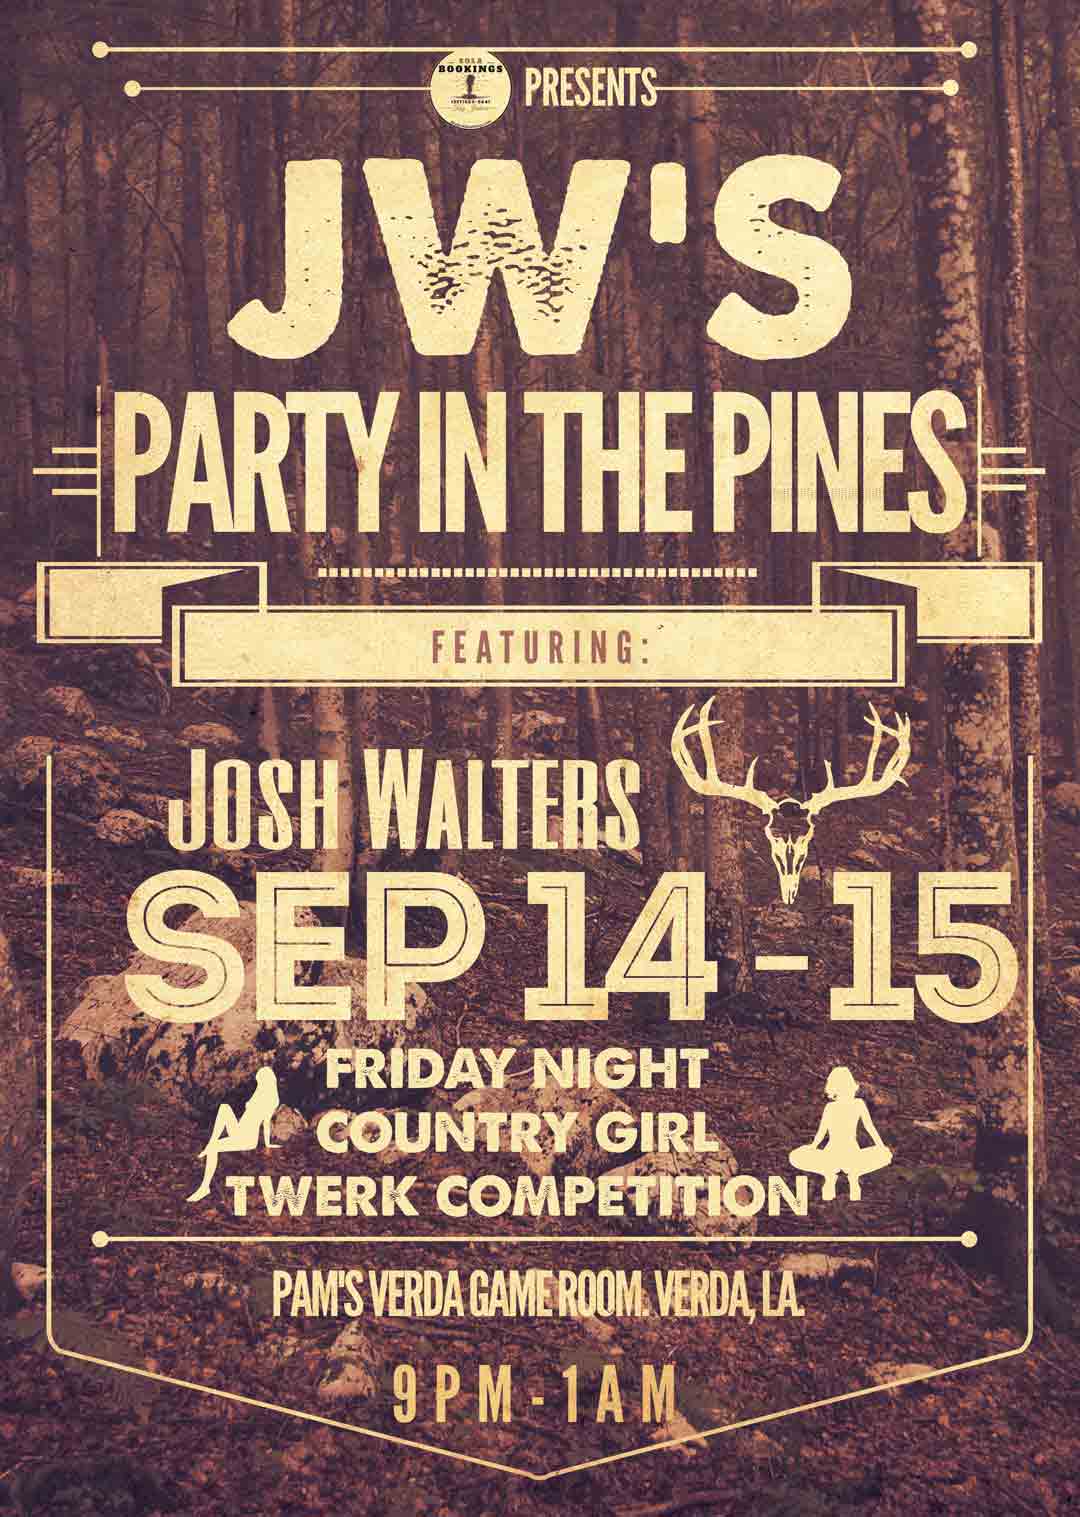 josh walters party in the pines typography flyer 1